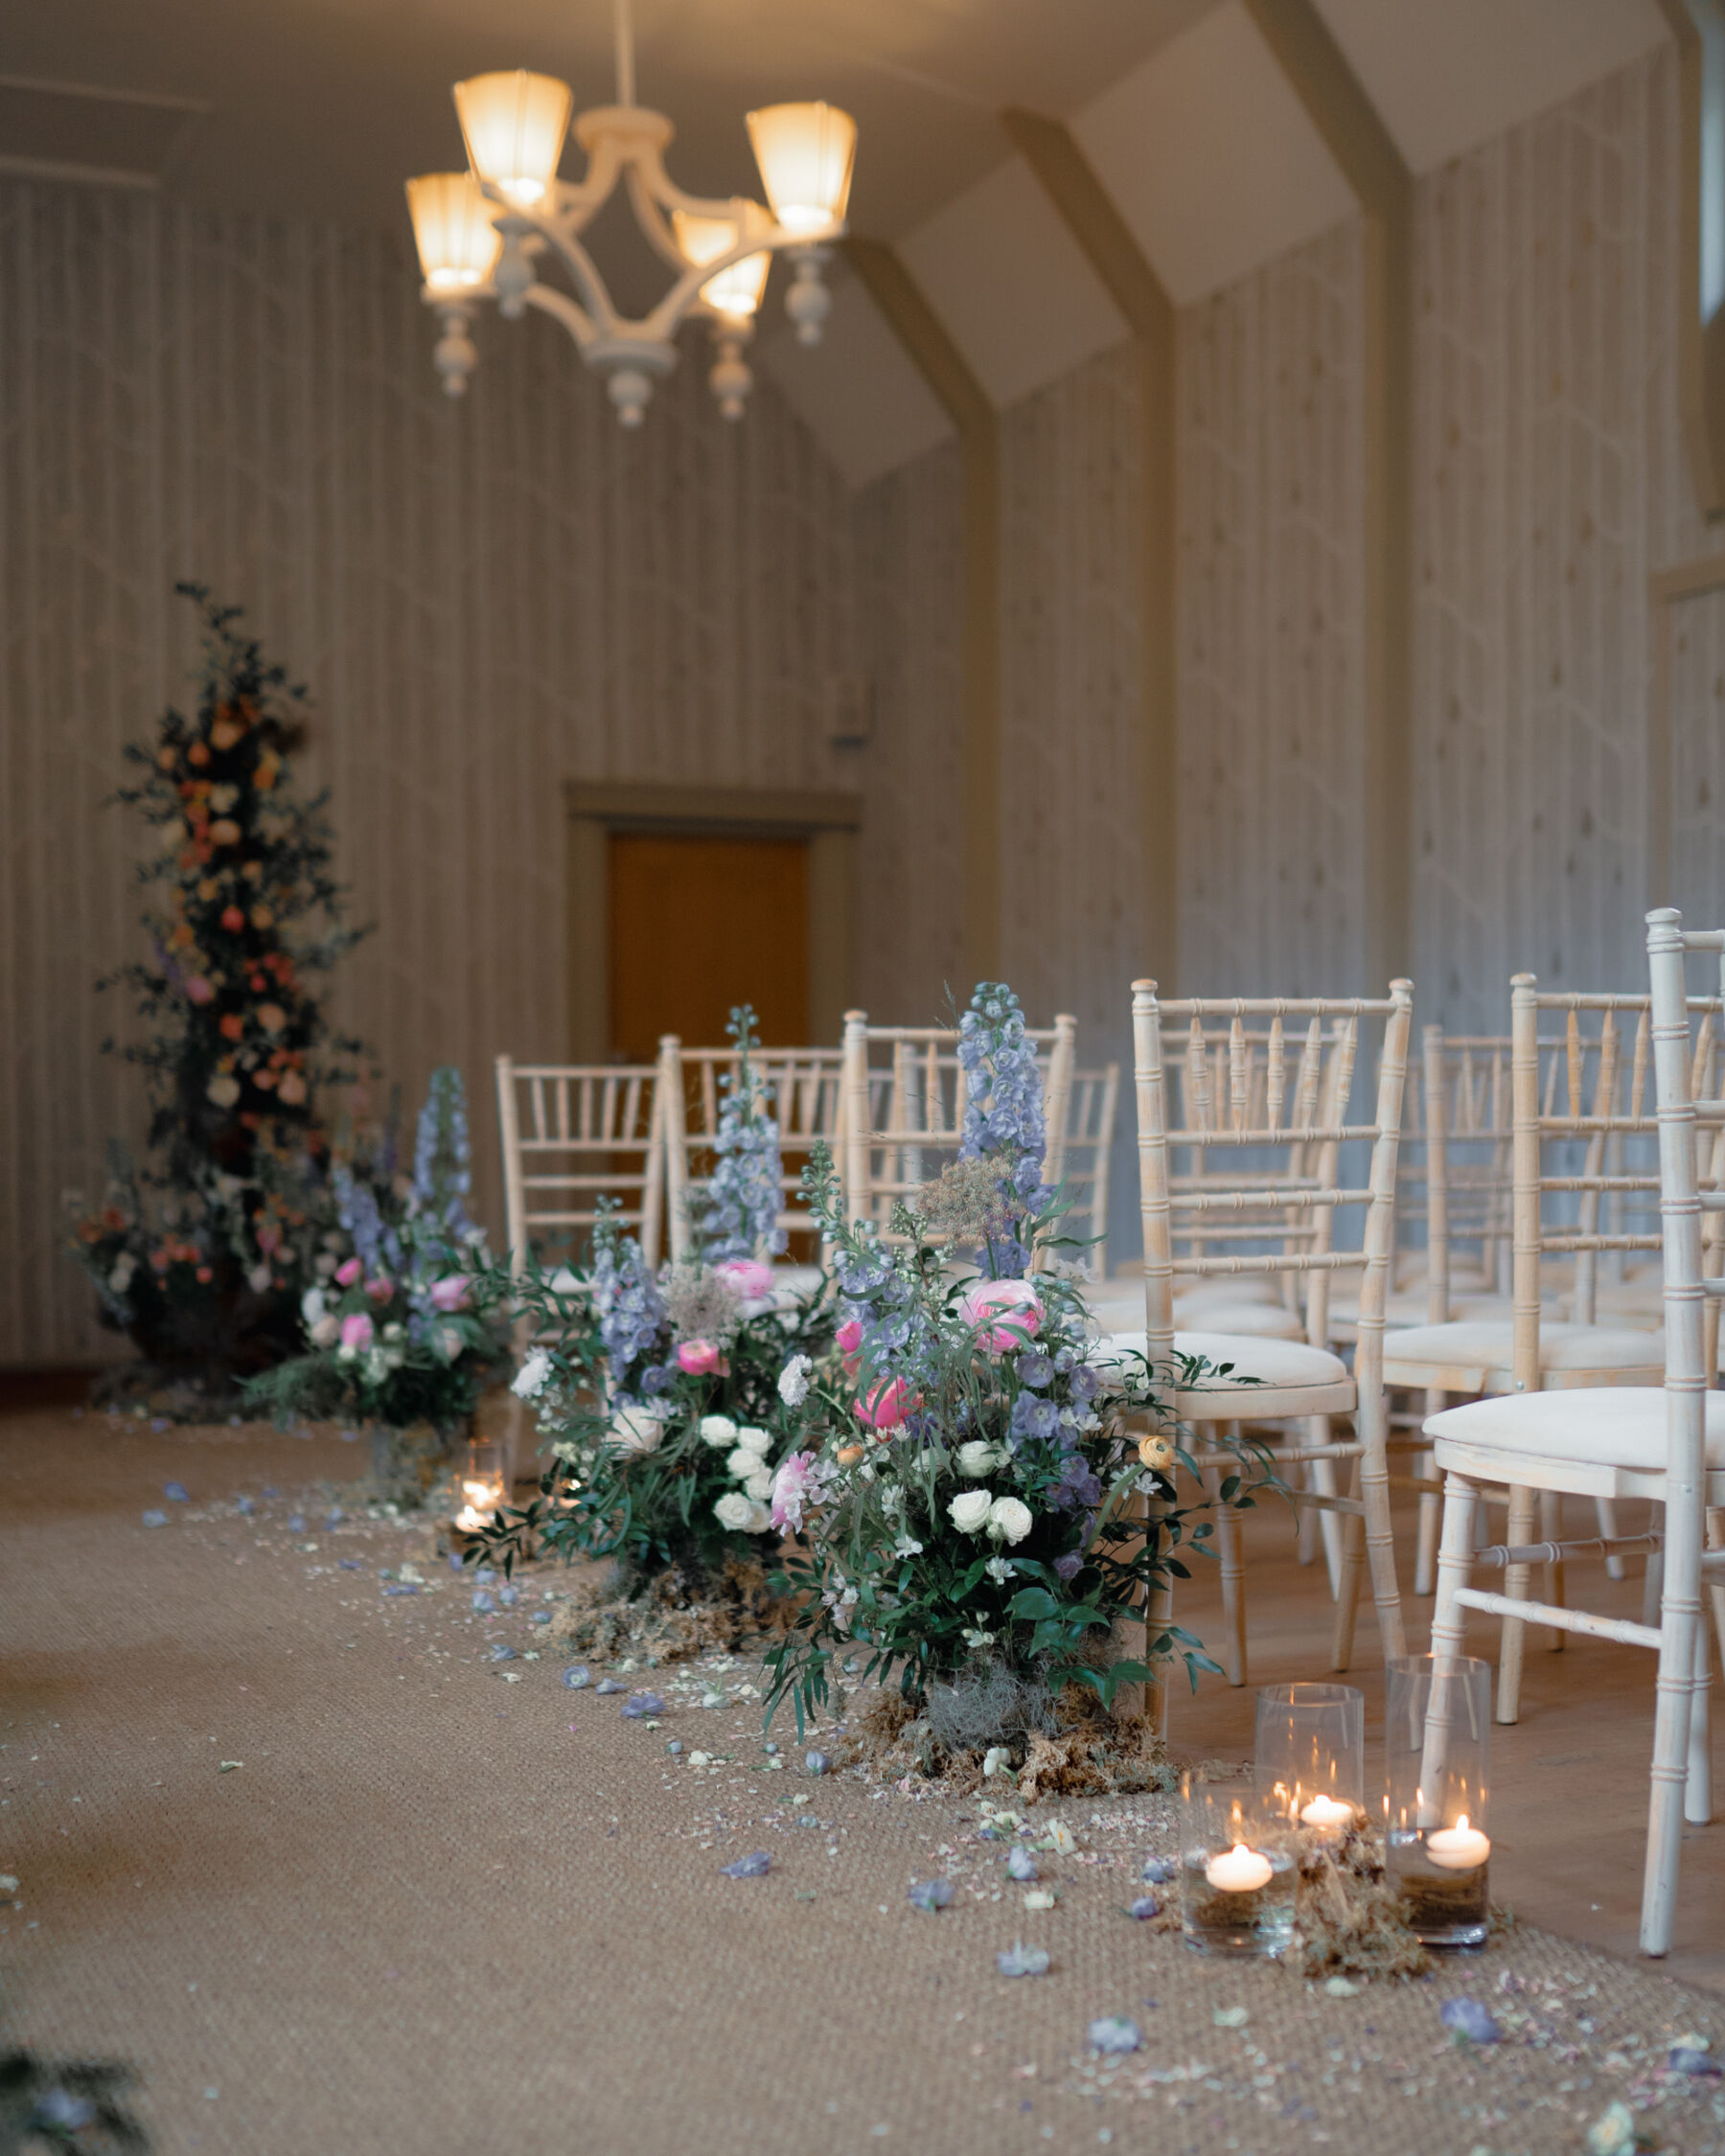 Wedding ceremony aisle lined with pastel flowers and scattered petals at Hampton Manor.